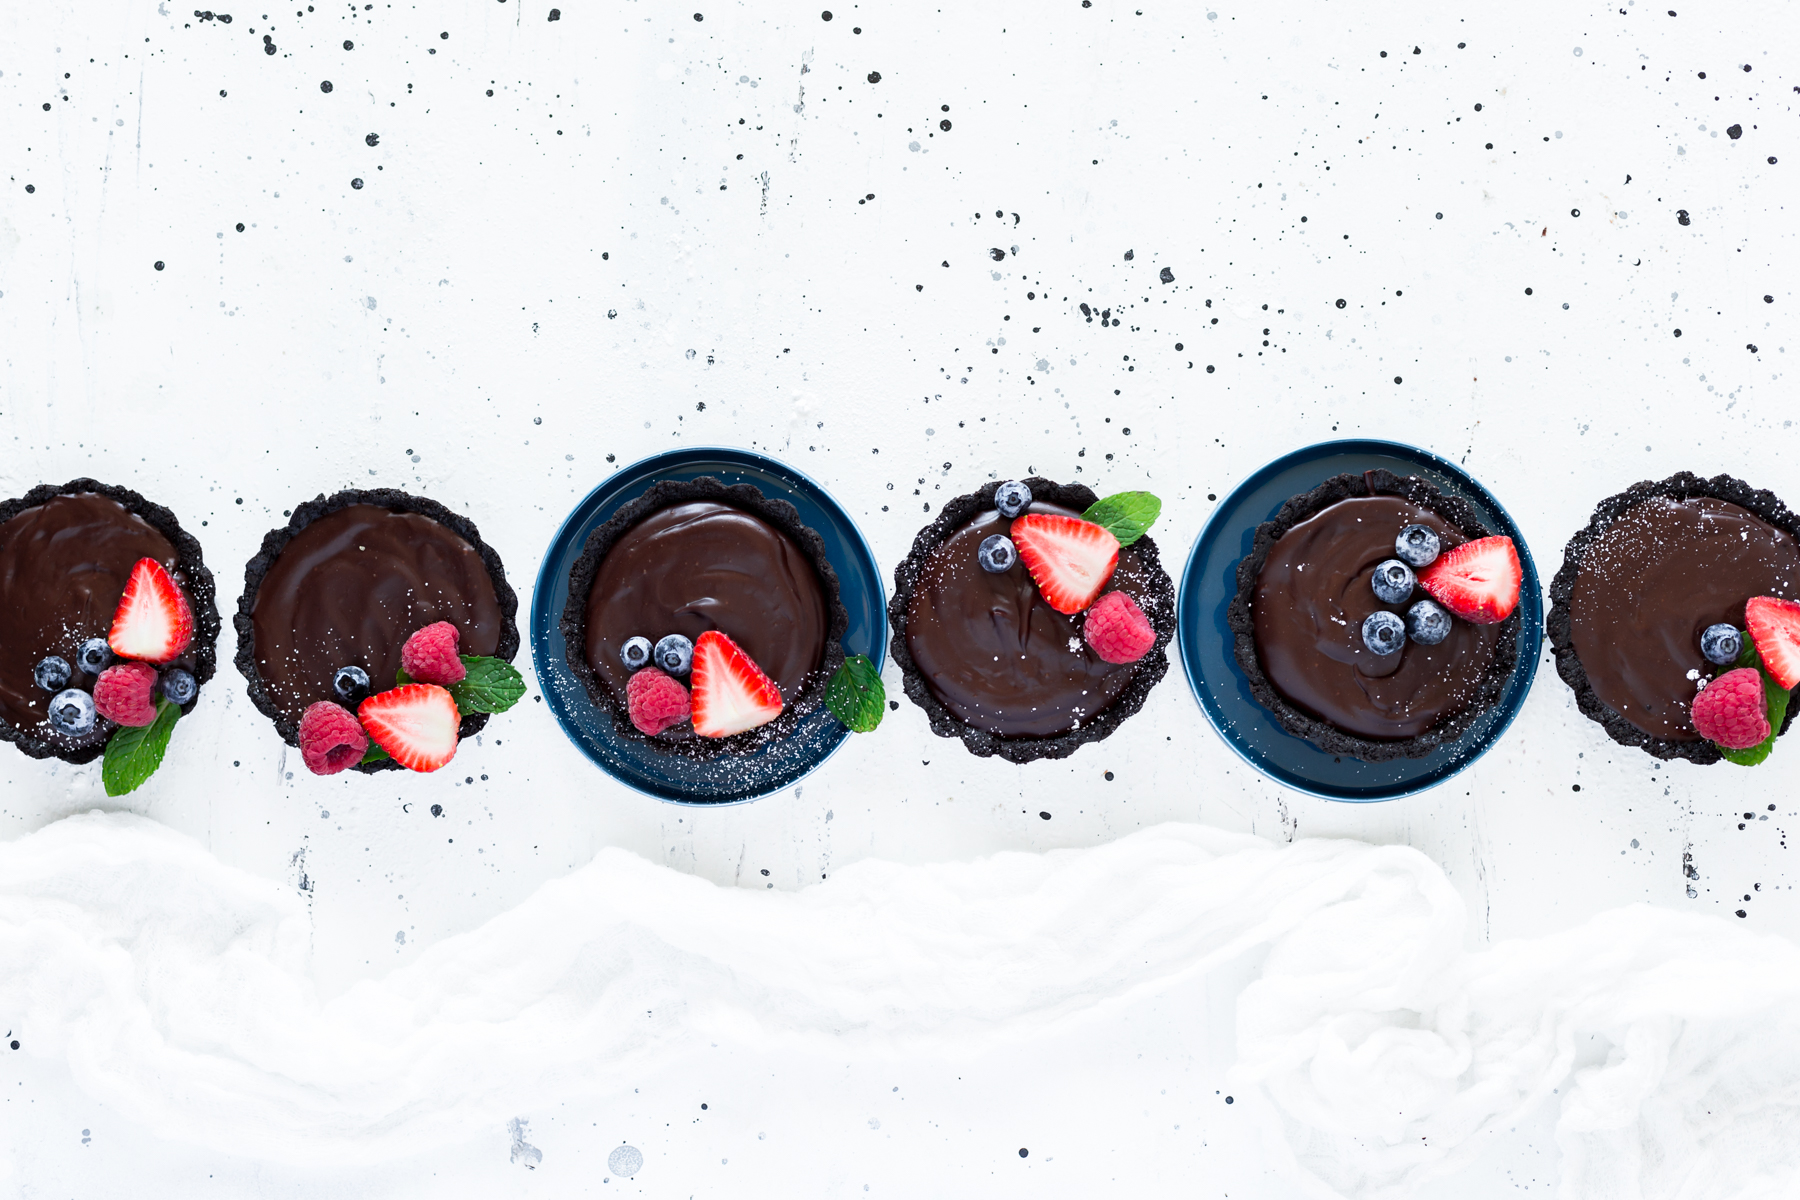 Mini No Bake Chocolate Tarts, easy to make and oh so delicious